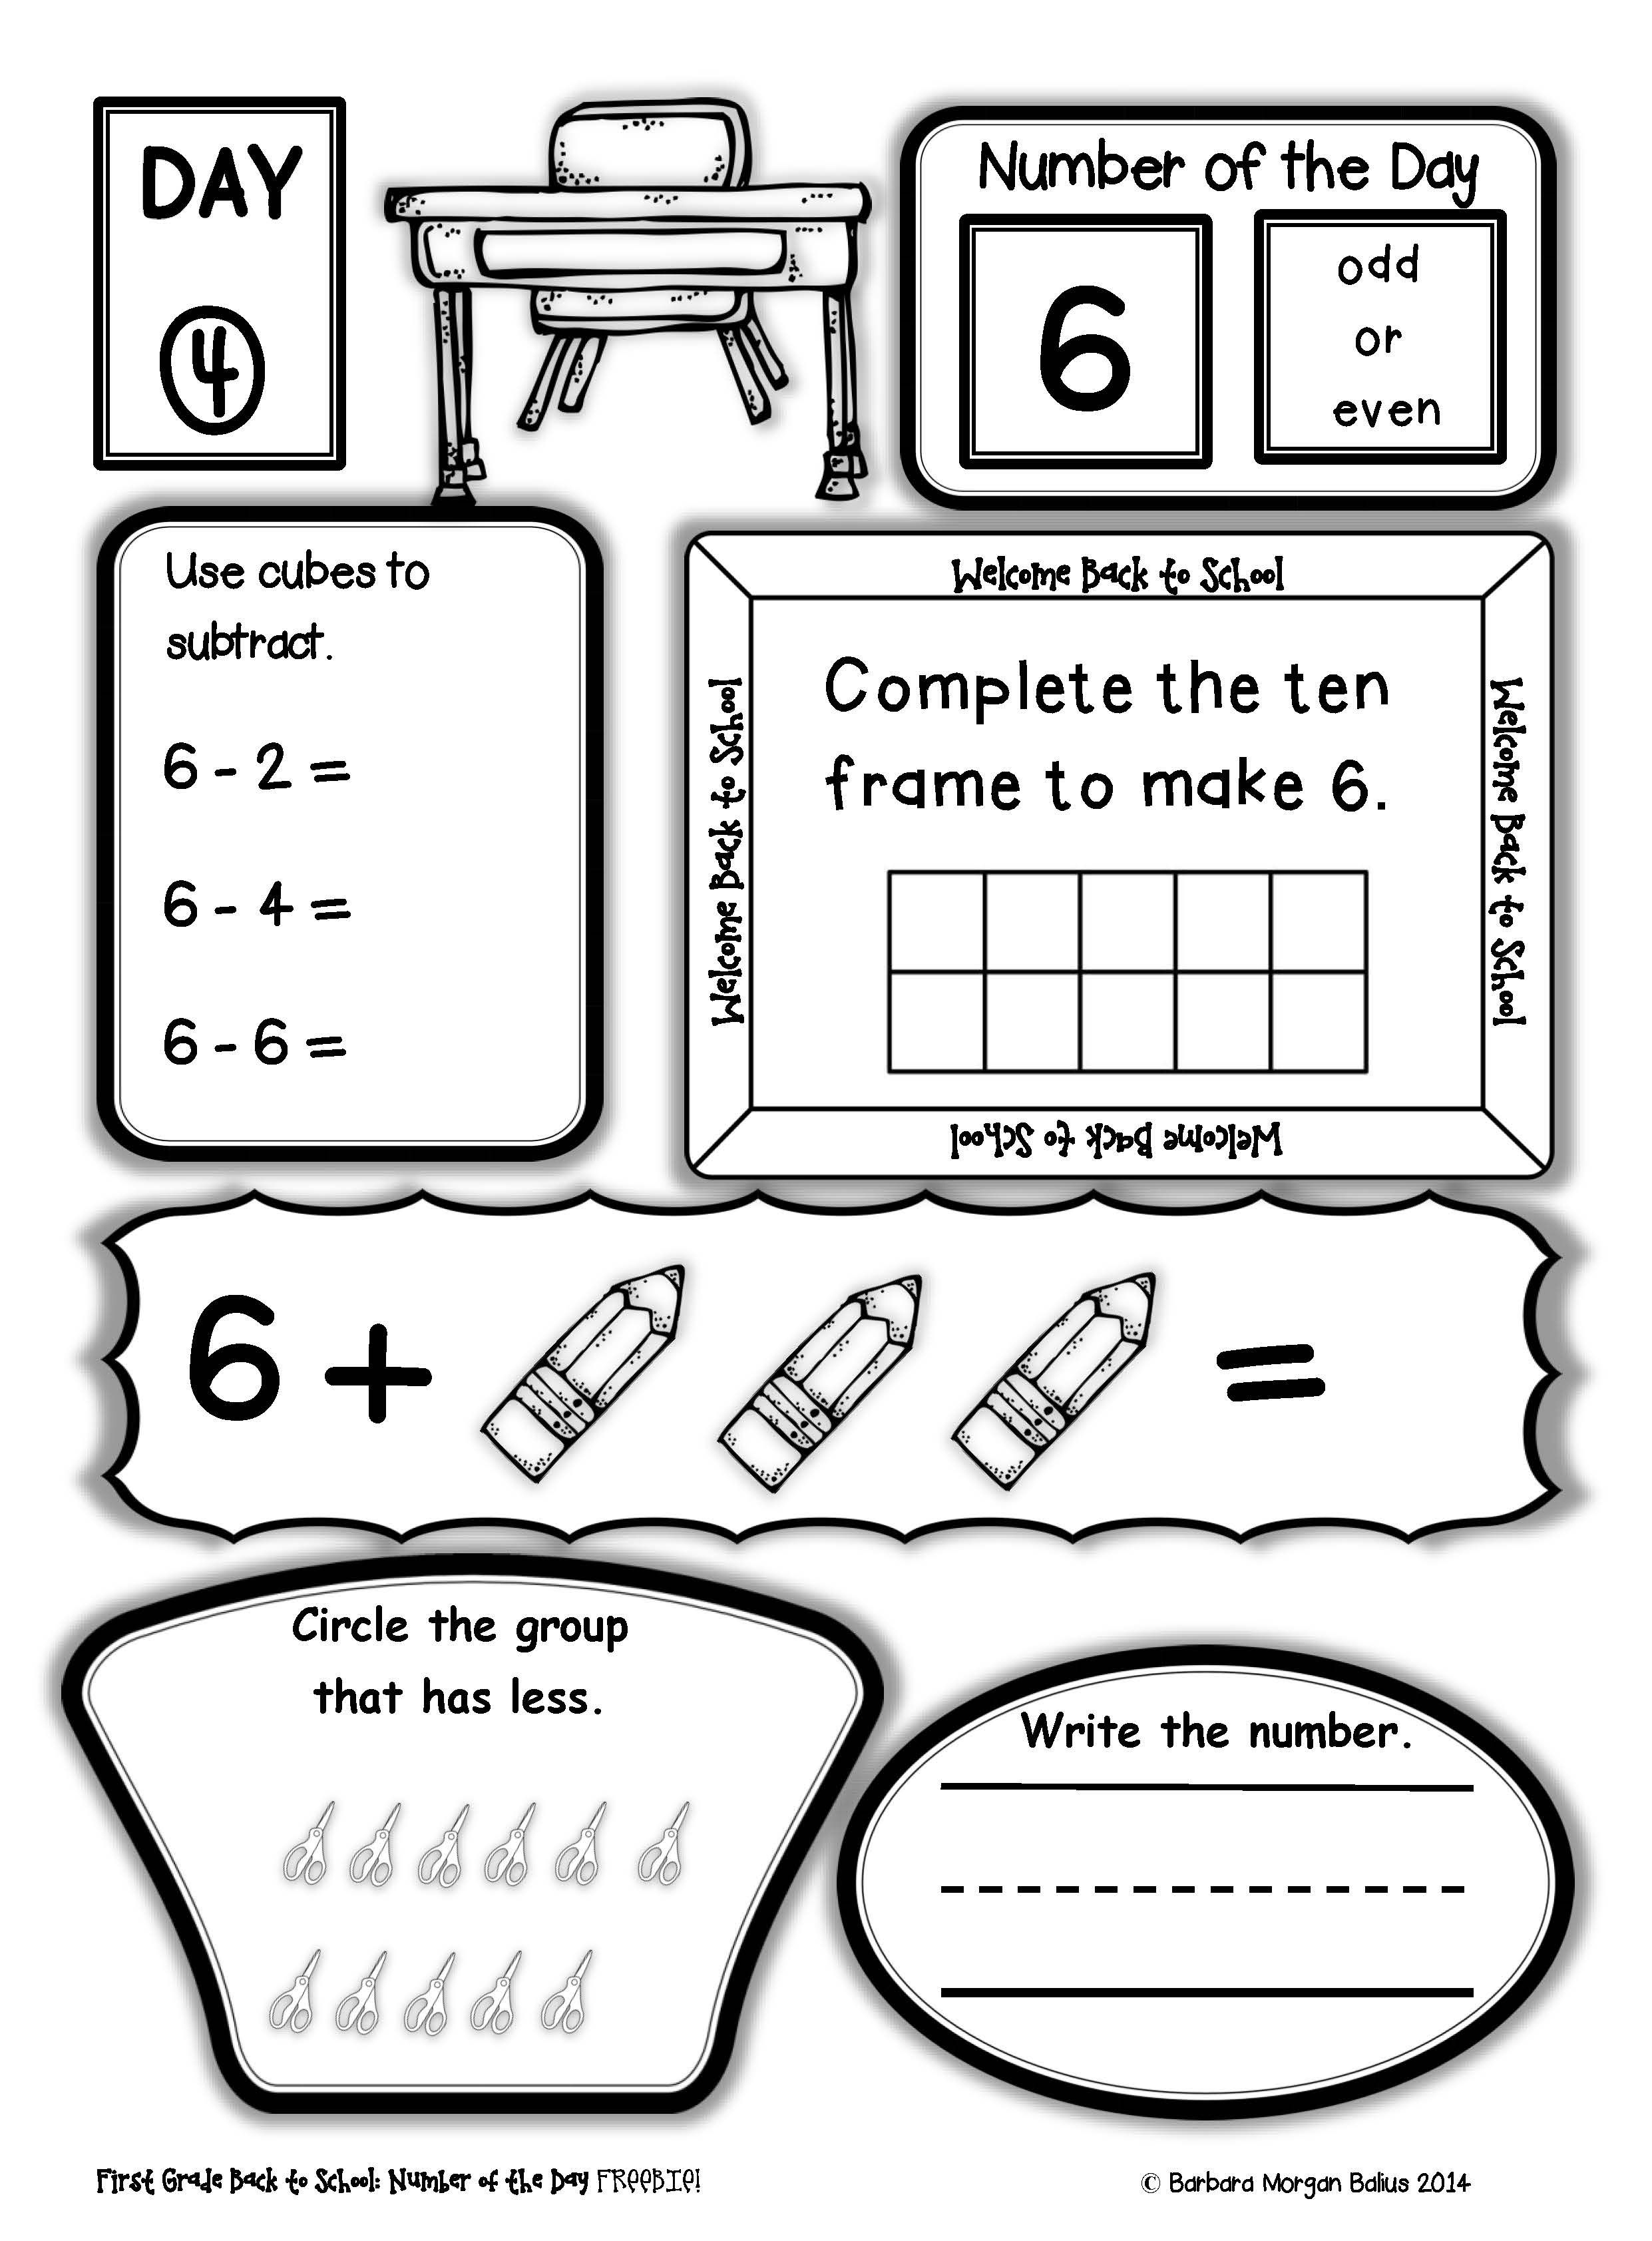 First Grade Back To School Number Of The Day Freebie! All Students - Free Printable Number Of The Day Worksheets